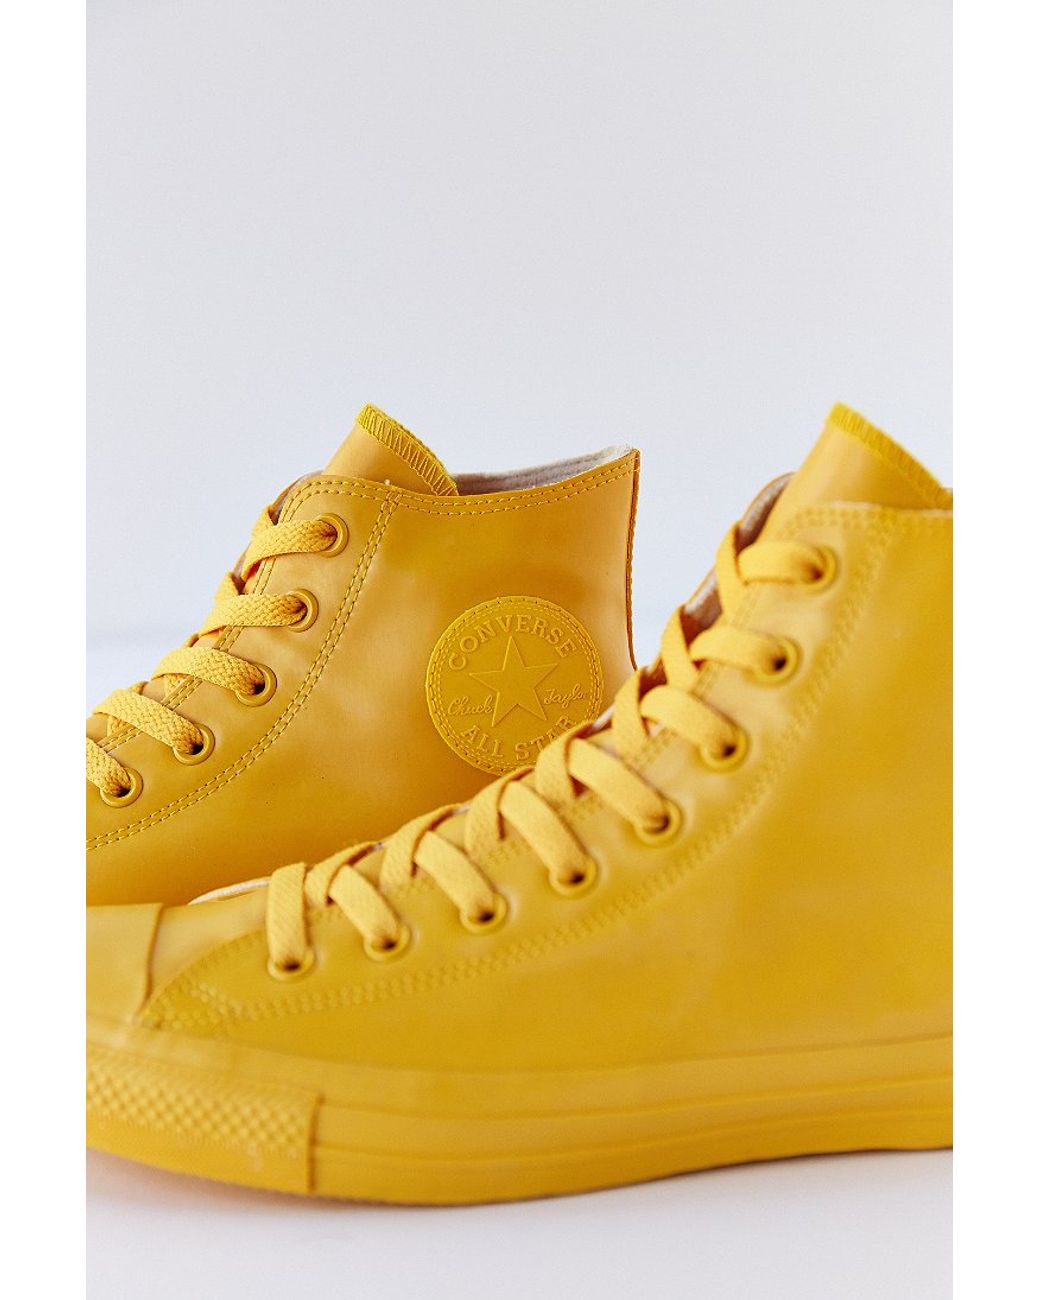 Converse Chuck Taylor All Star Rubber High-top Sneakerboot in Mustard ( Yellow) for Men | Lyst